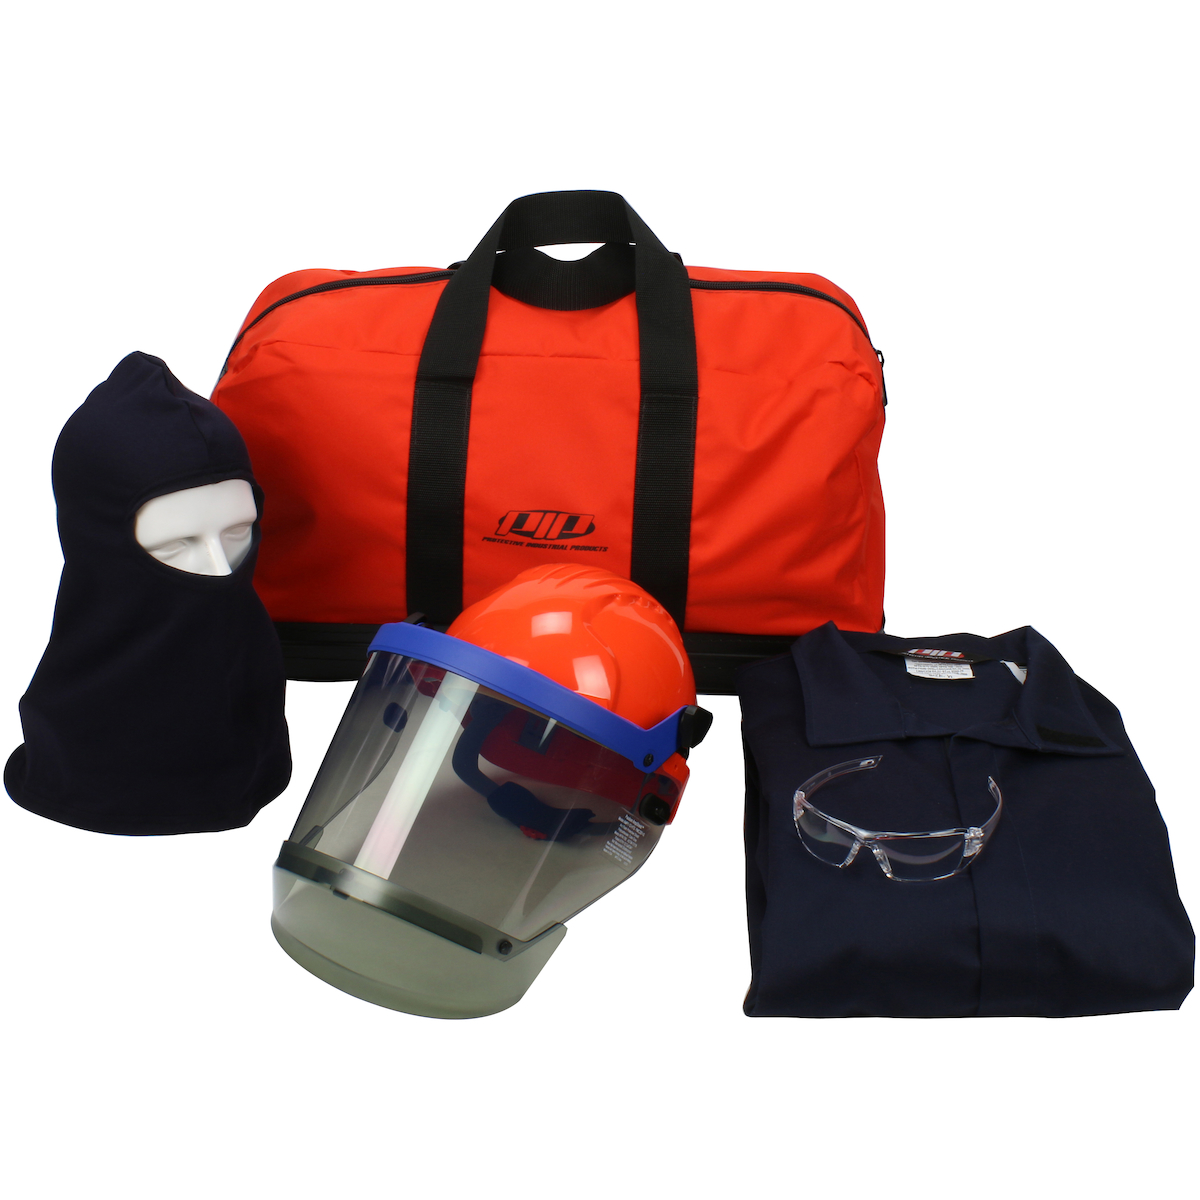 PIP 8 Cal/cm2 Arc/FR Dual Certified PPE Kit from Columbia Safety